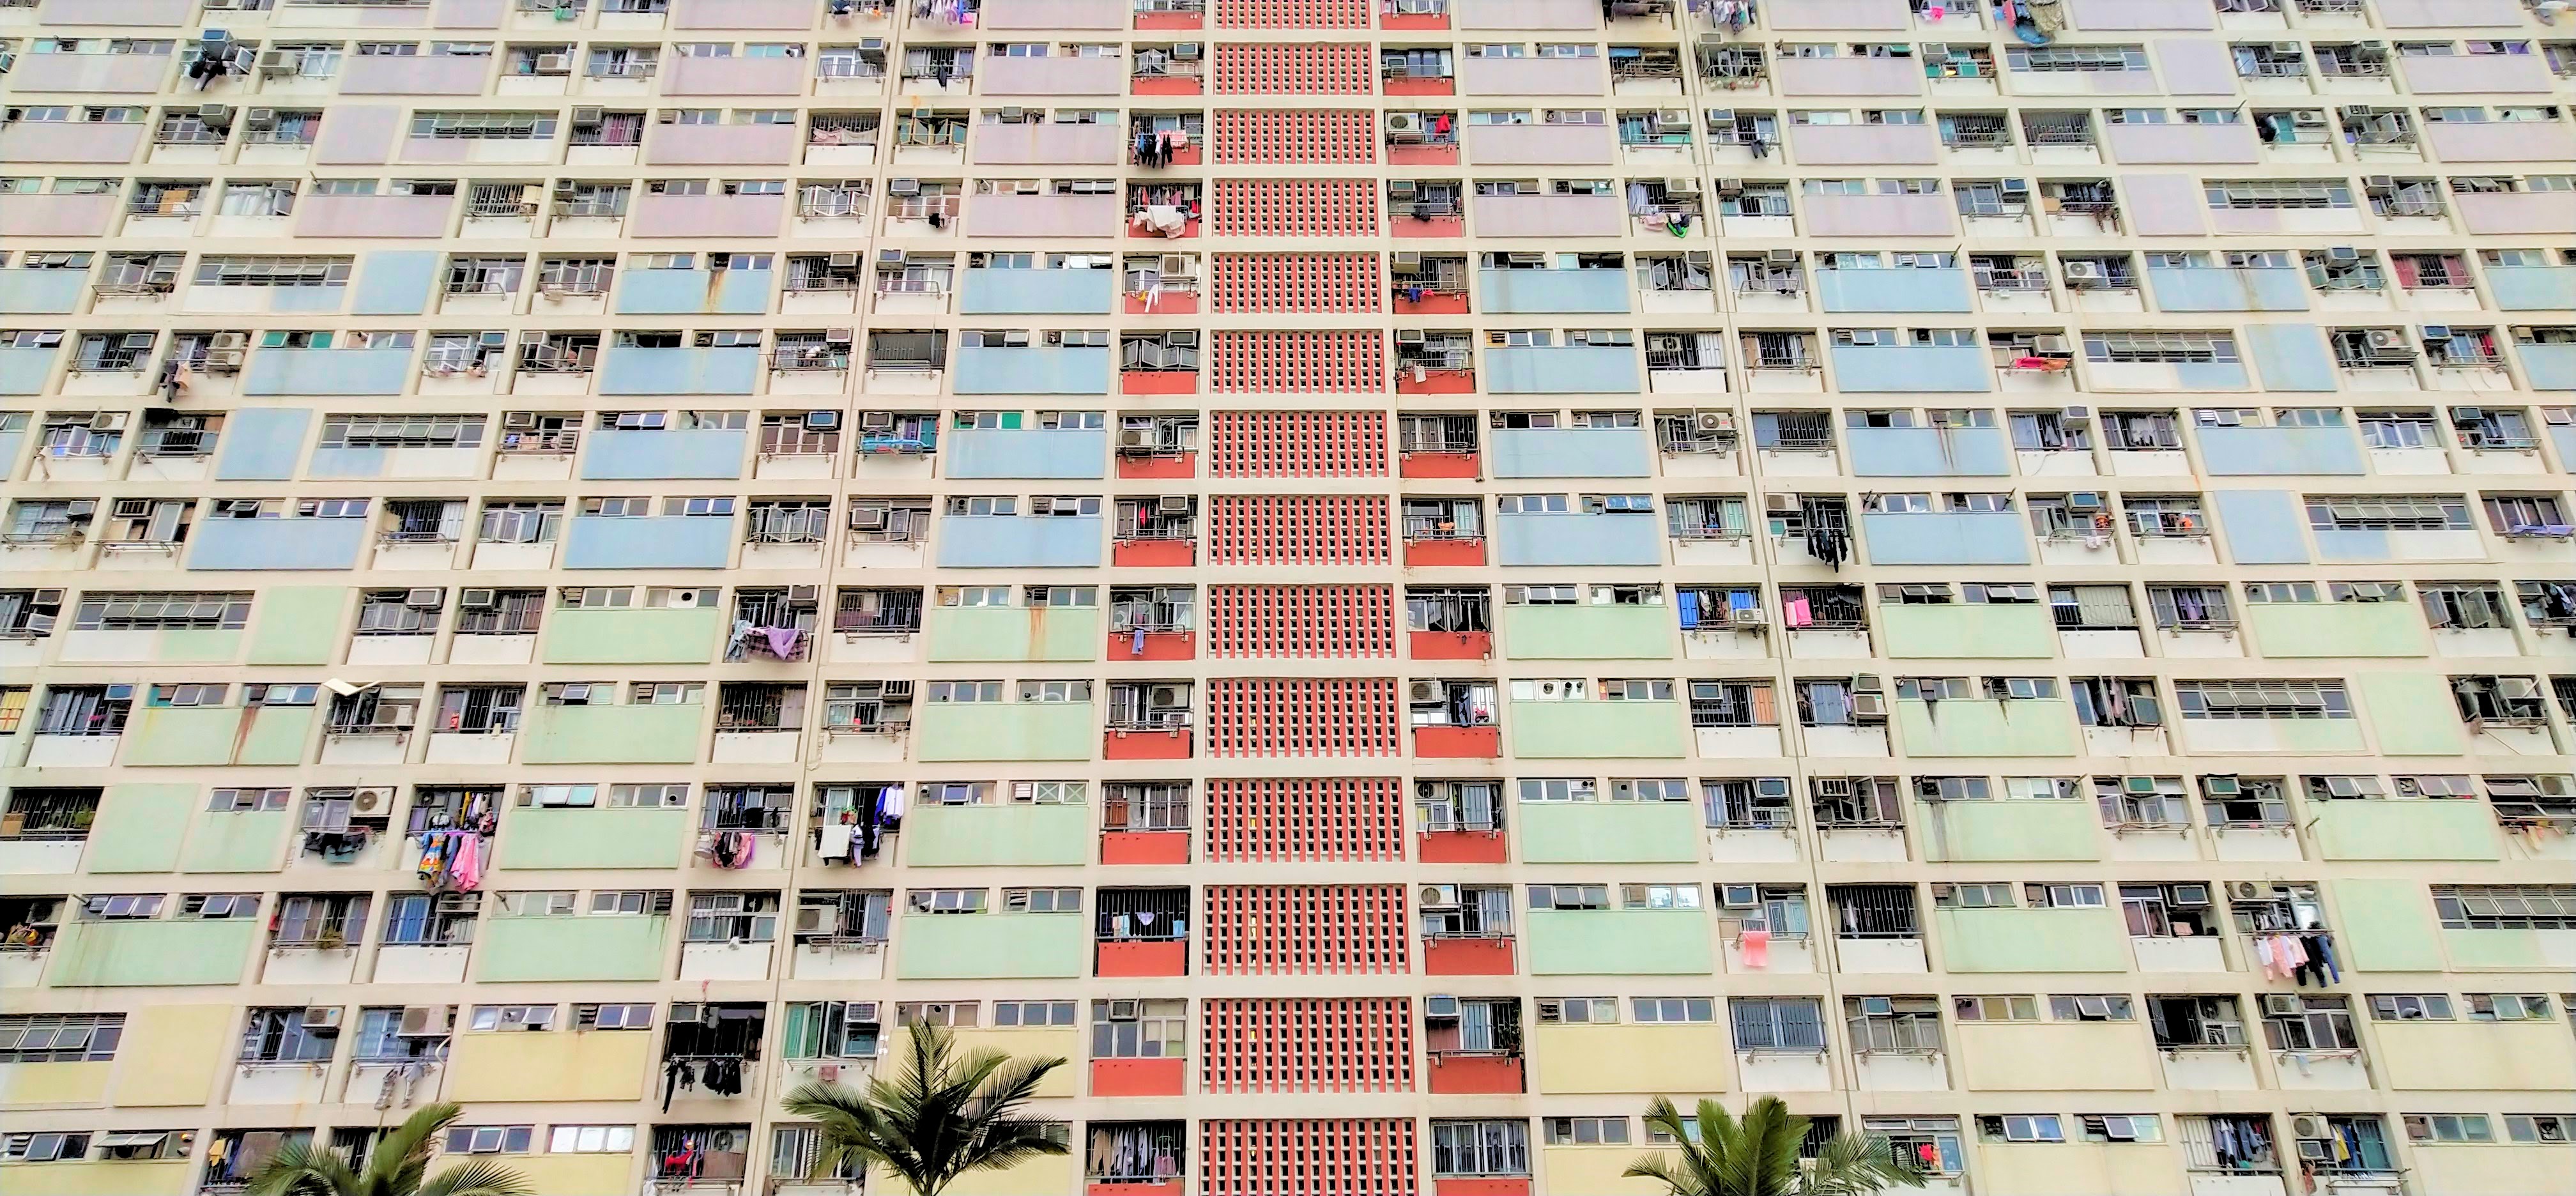 Buildings of Choi Hung Estate have a colorful facade